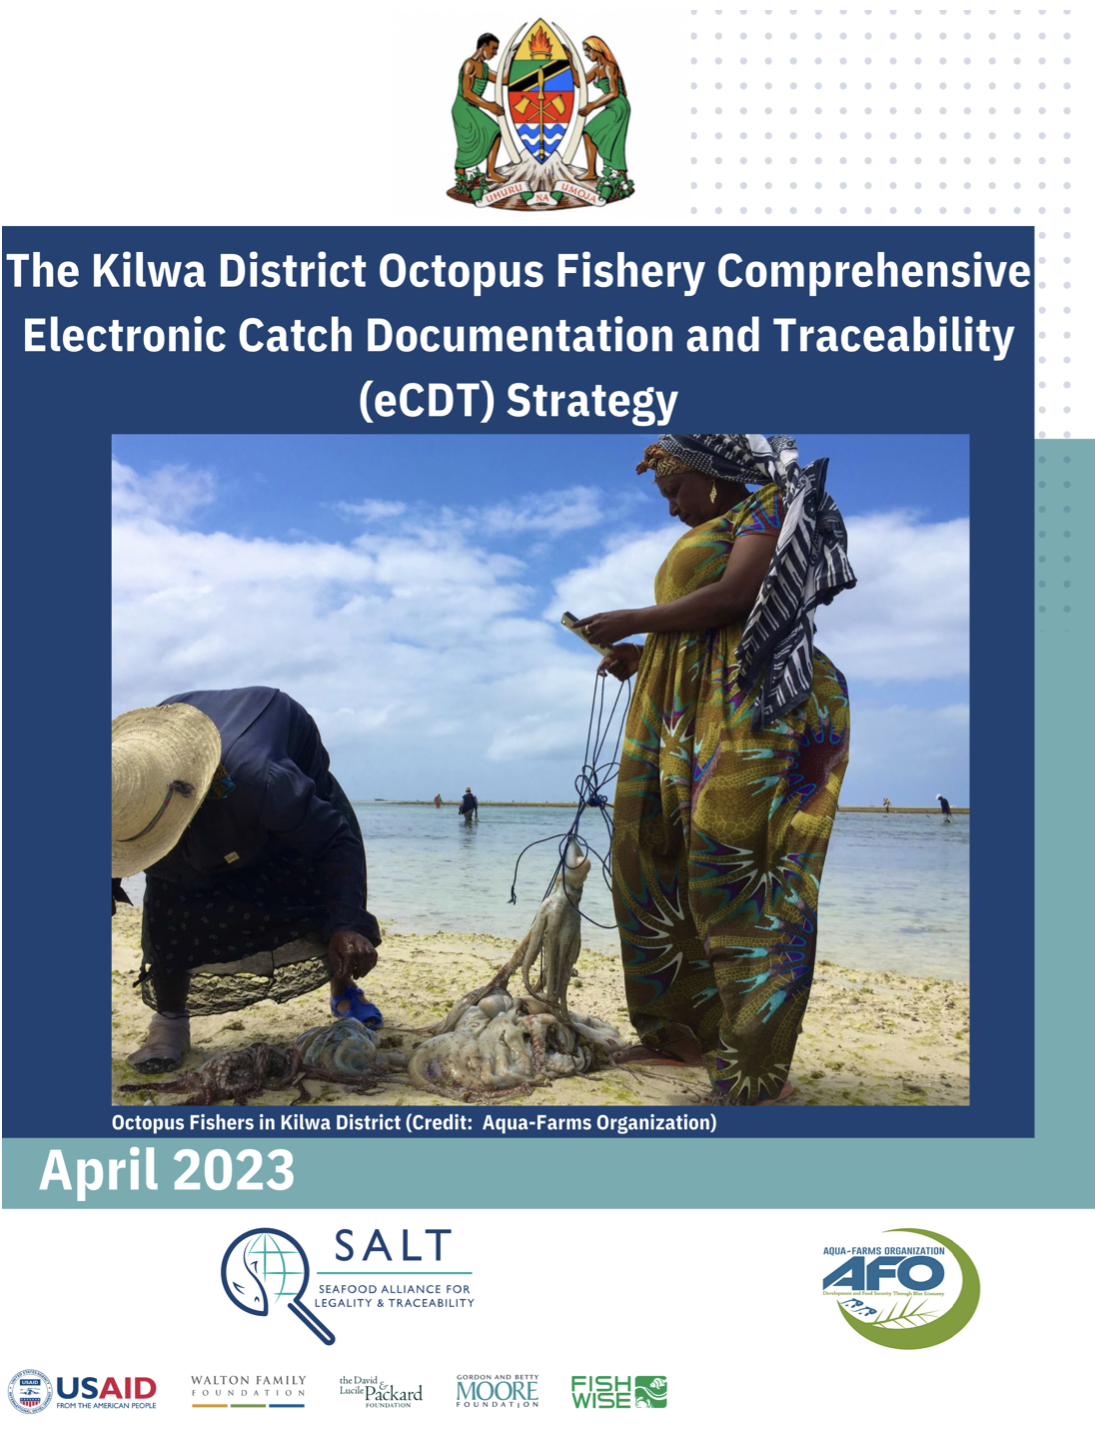 The Kilwa District Octopus Fishery Comprehensive eCDT Strategy